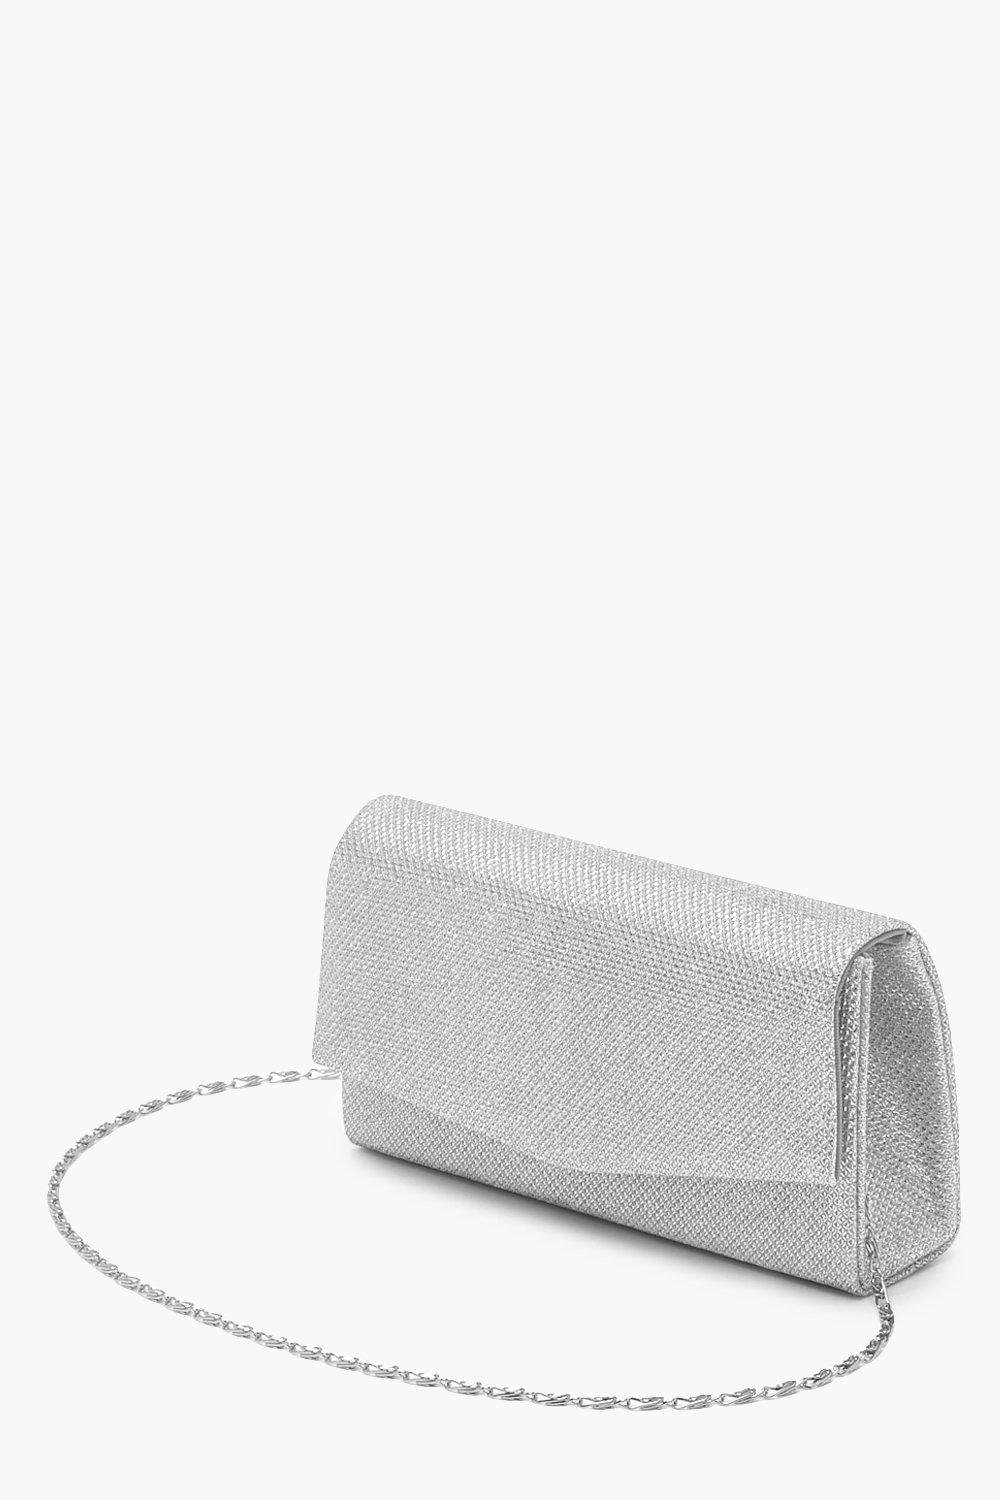 The Scoop Clutch pouch - Grey - Kwooksta